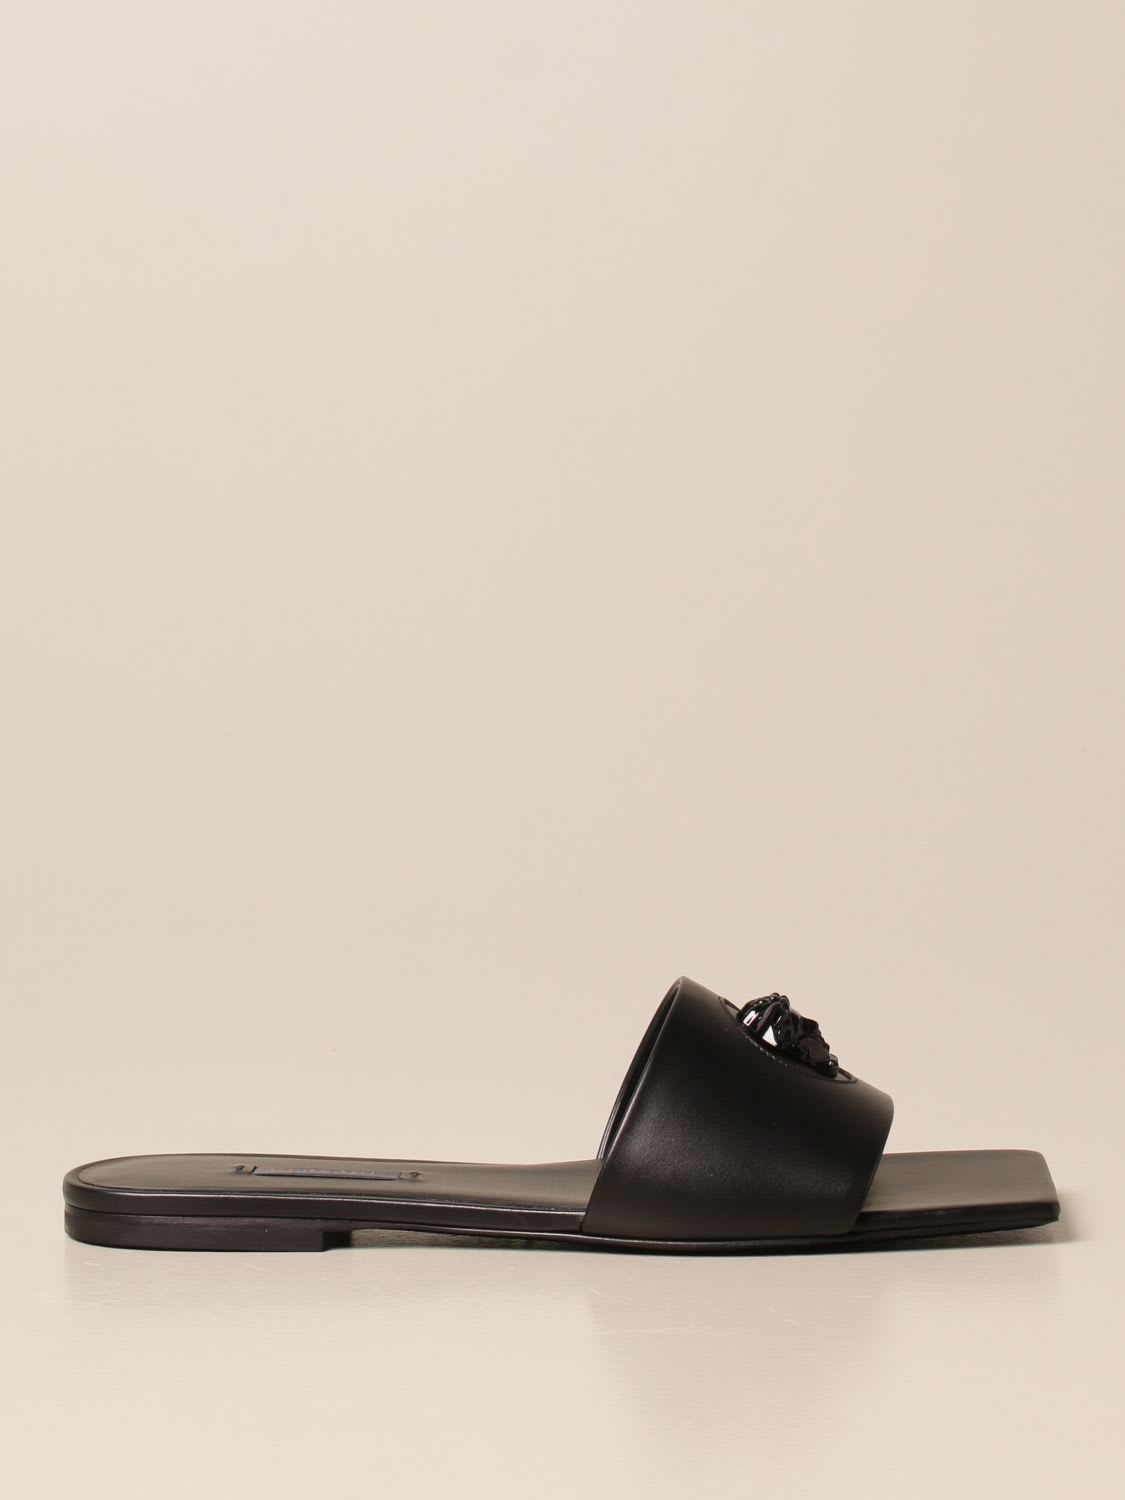 Buy Versace Flat Sandals Slide Versace Sandal In Leather With Medusa Head online, shop Versace shoes with free shipping